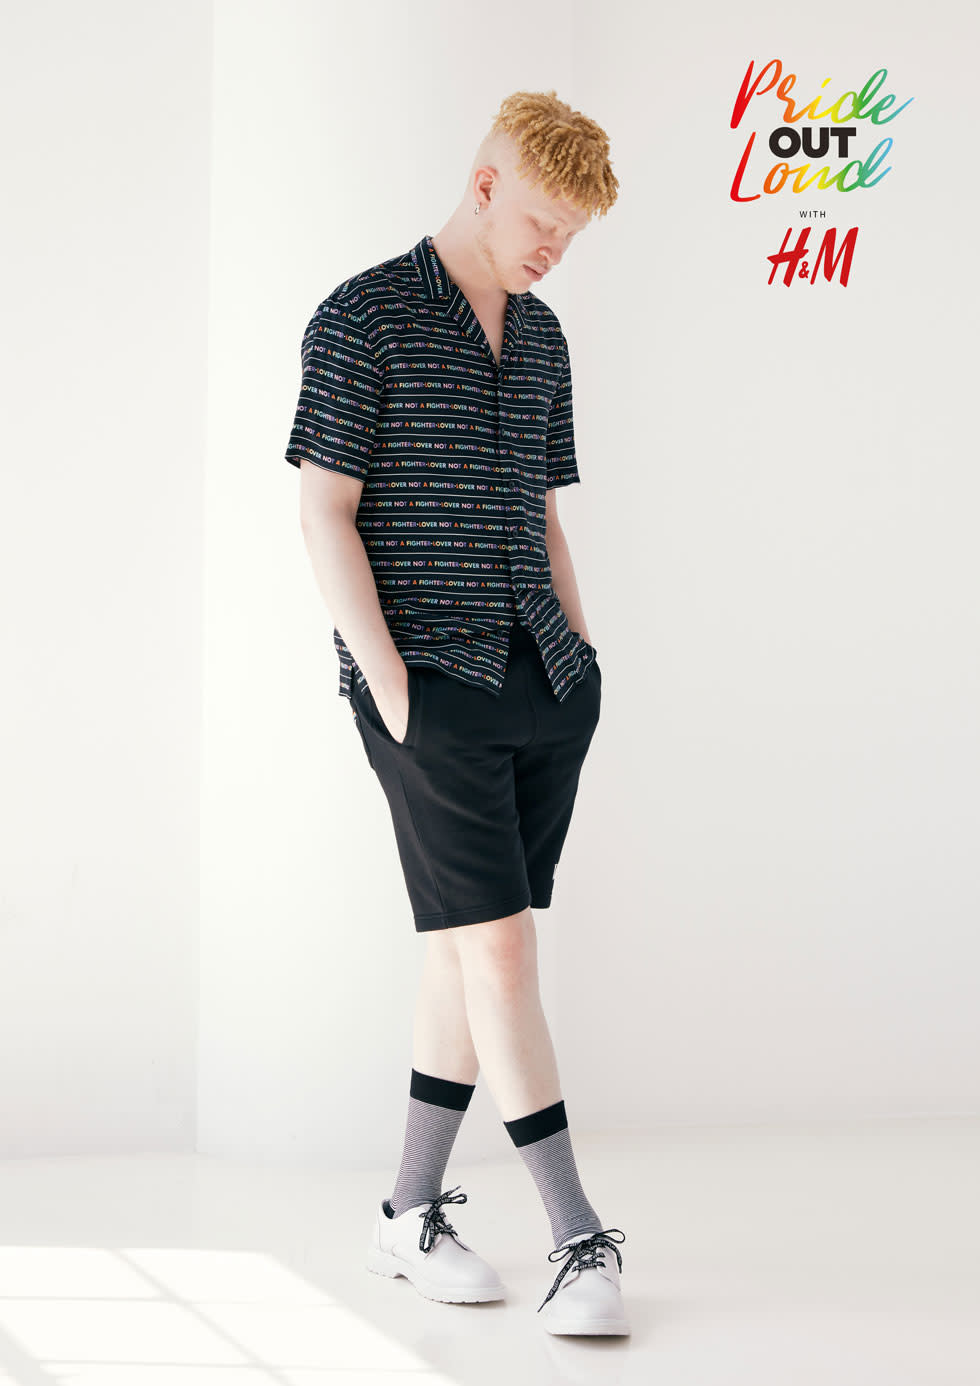 H&M Pride Out Loud campaign featuring Shaun Ross. (Photo: Courtesy of H&M)